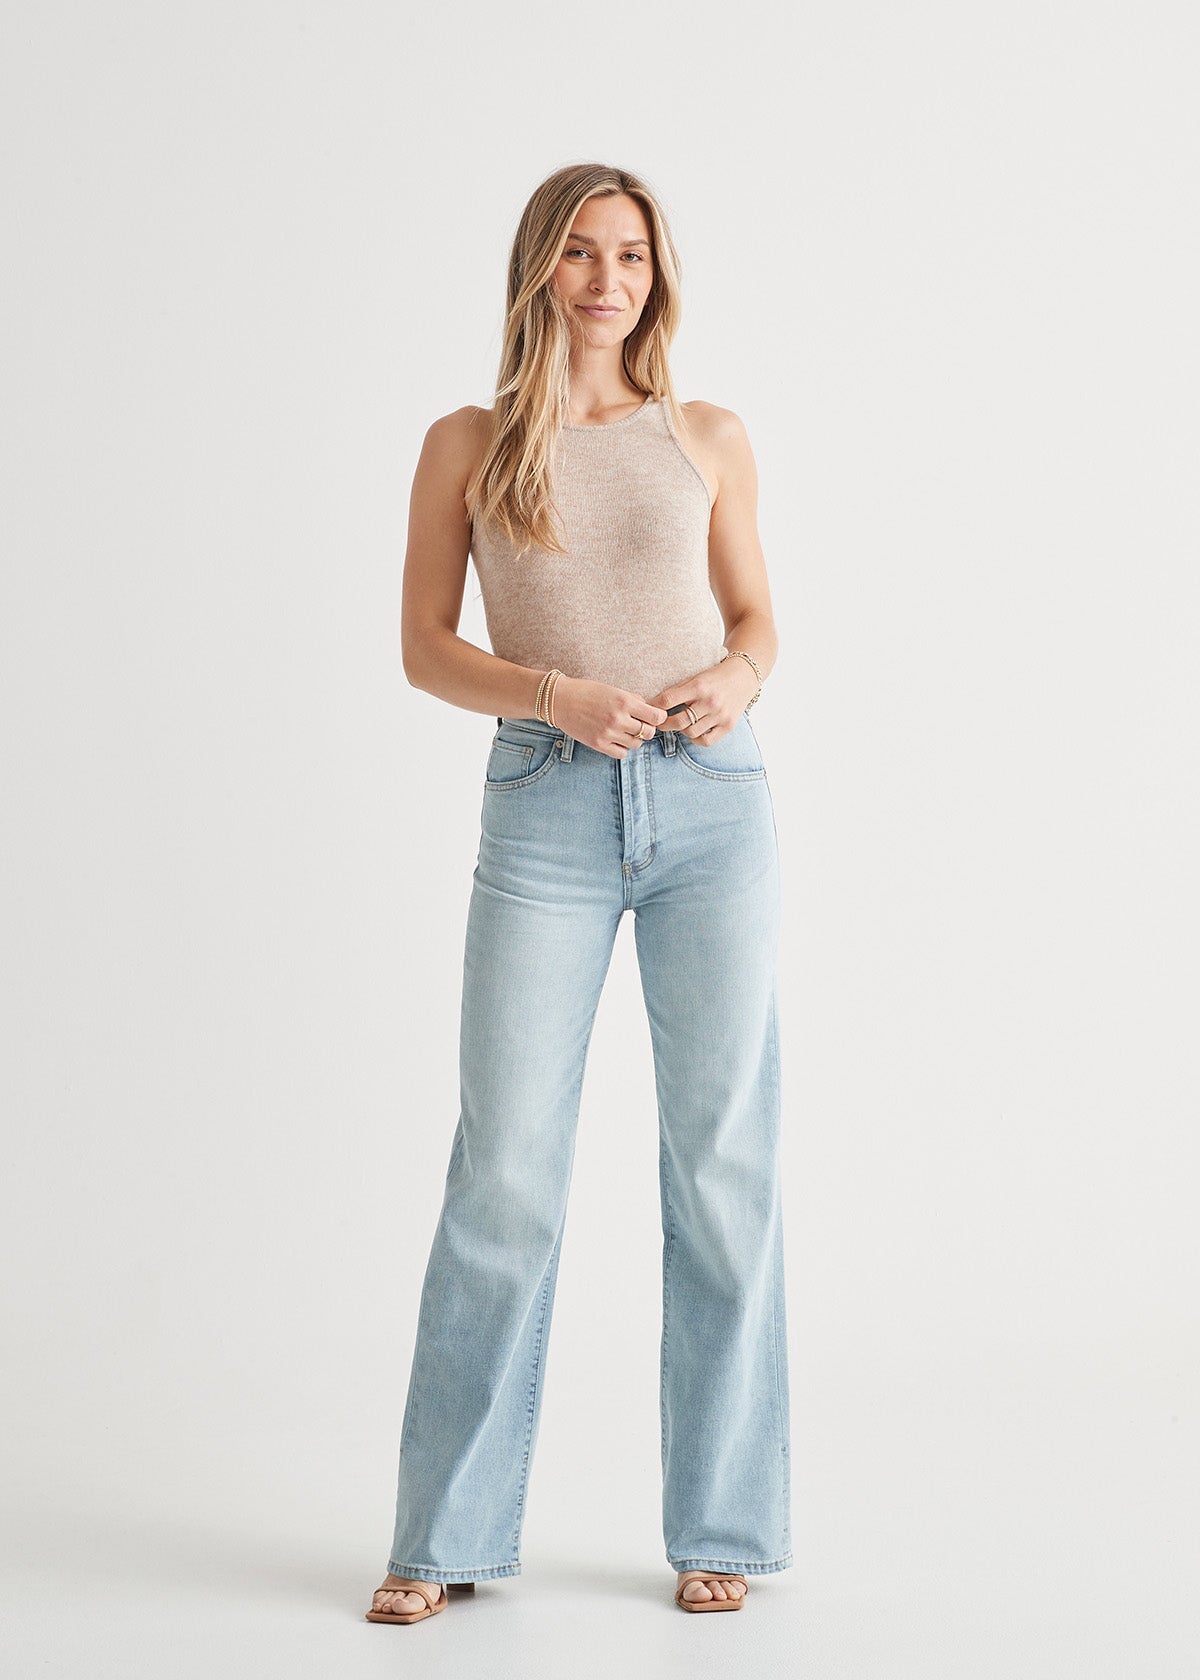 Rhero Women's High Waisted Jeans Pants 56623 Blue Jeans 2 at